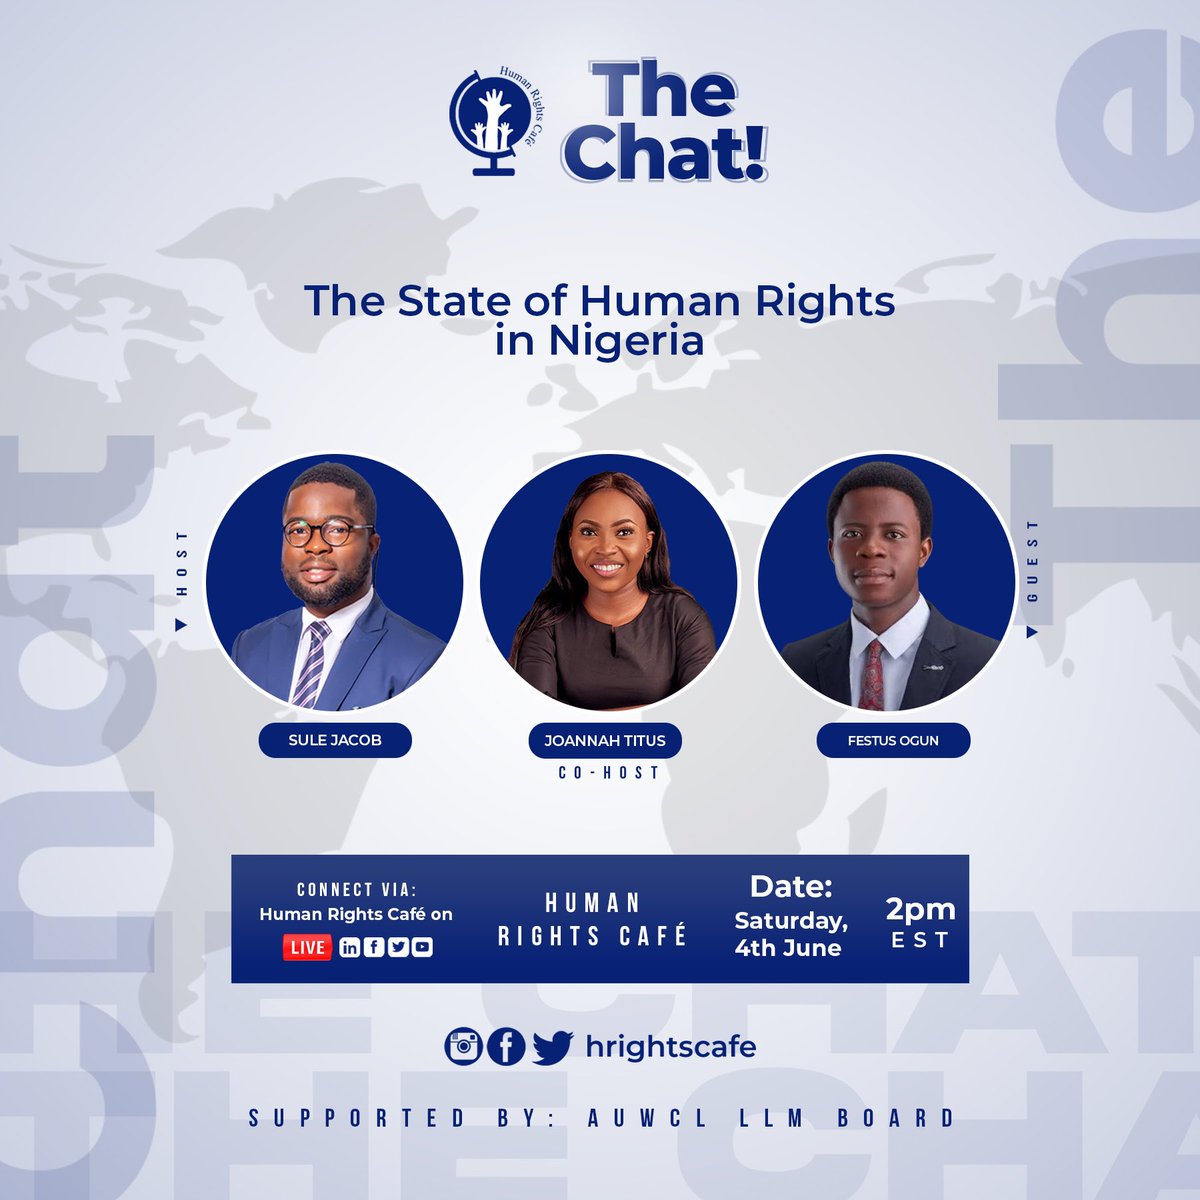 Constitutional Lawyer & Human Rights Activist @mrfestusogun will be discussing the 'State of Human Rights in Nigeria' @hrightscafe  on Saturday 4th of June at 7pm Nigerian time and 2pm EST. You can watch the live streaming on Facebook via Human Rights Café Timeline. Thank you!